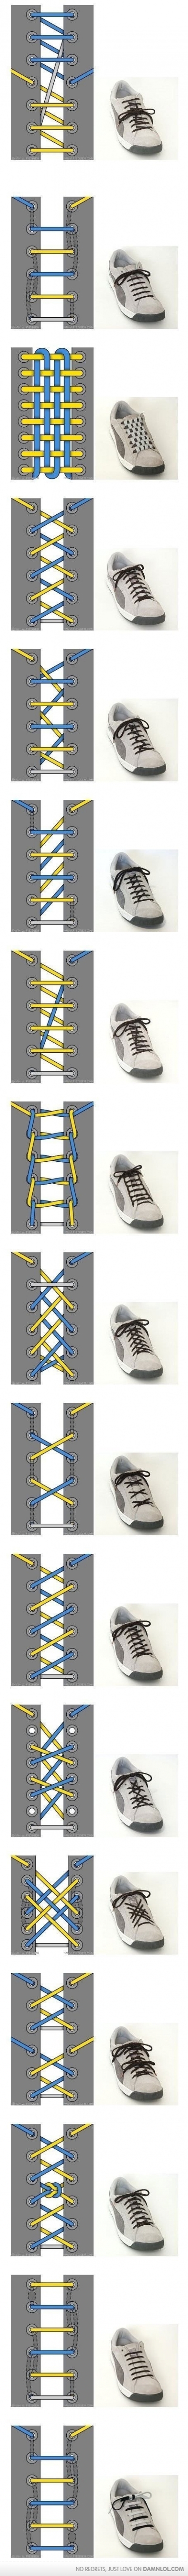 36 Cool Ways To Tie Your Shoe Laces